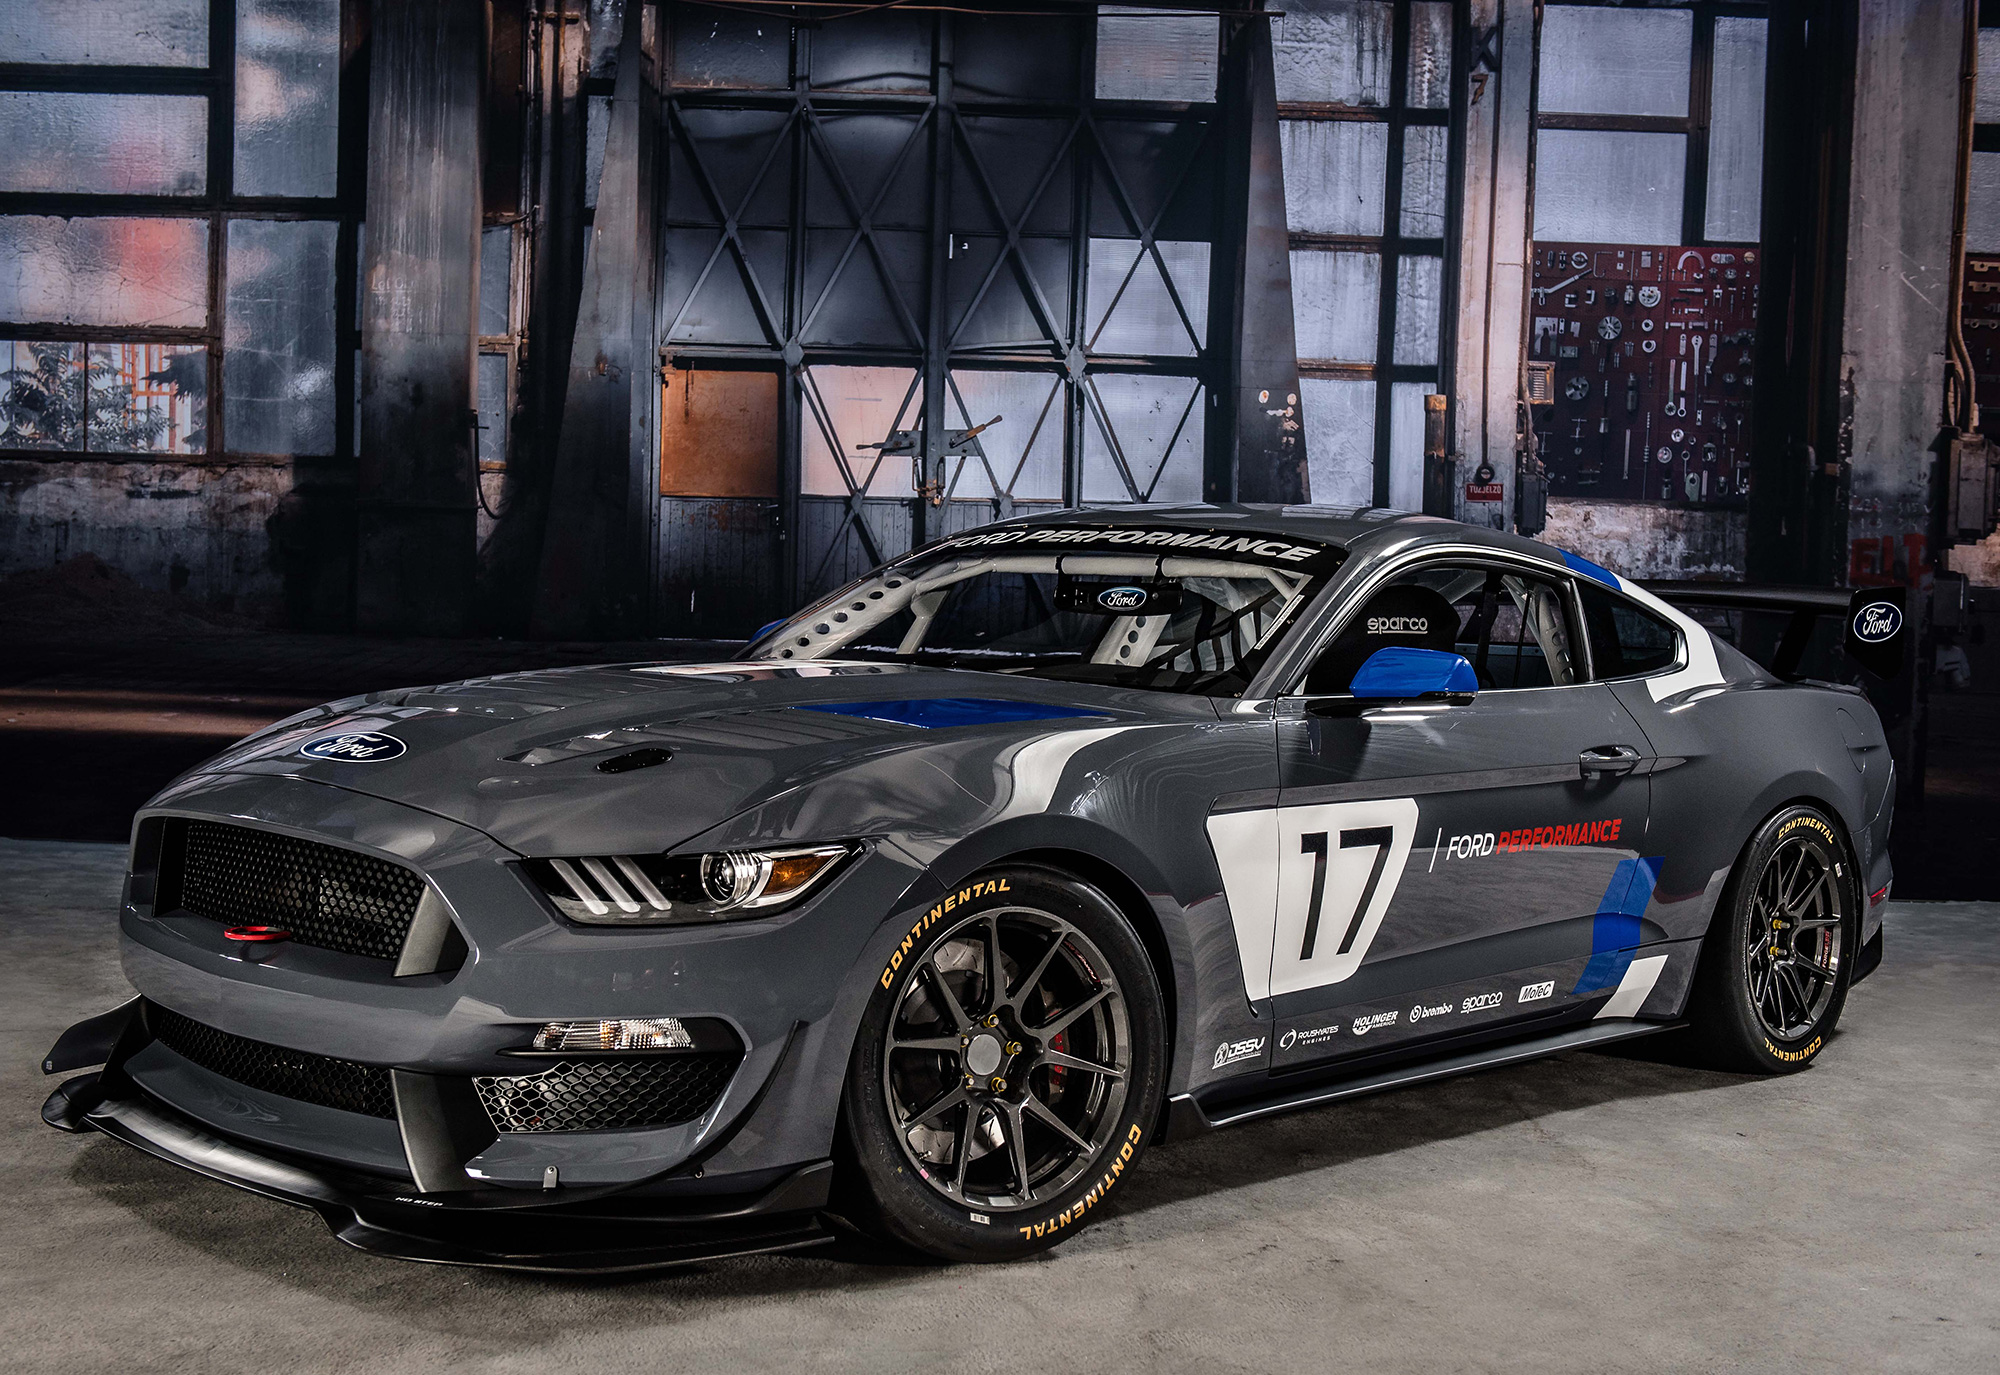 The-Mustang-GT4,-unveiled-at-the-2016-SEMA-Show-in-Las-Vegas.jpg